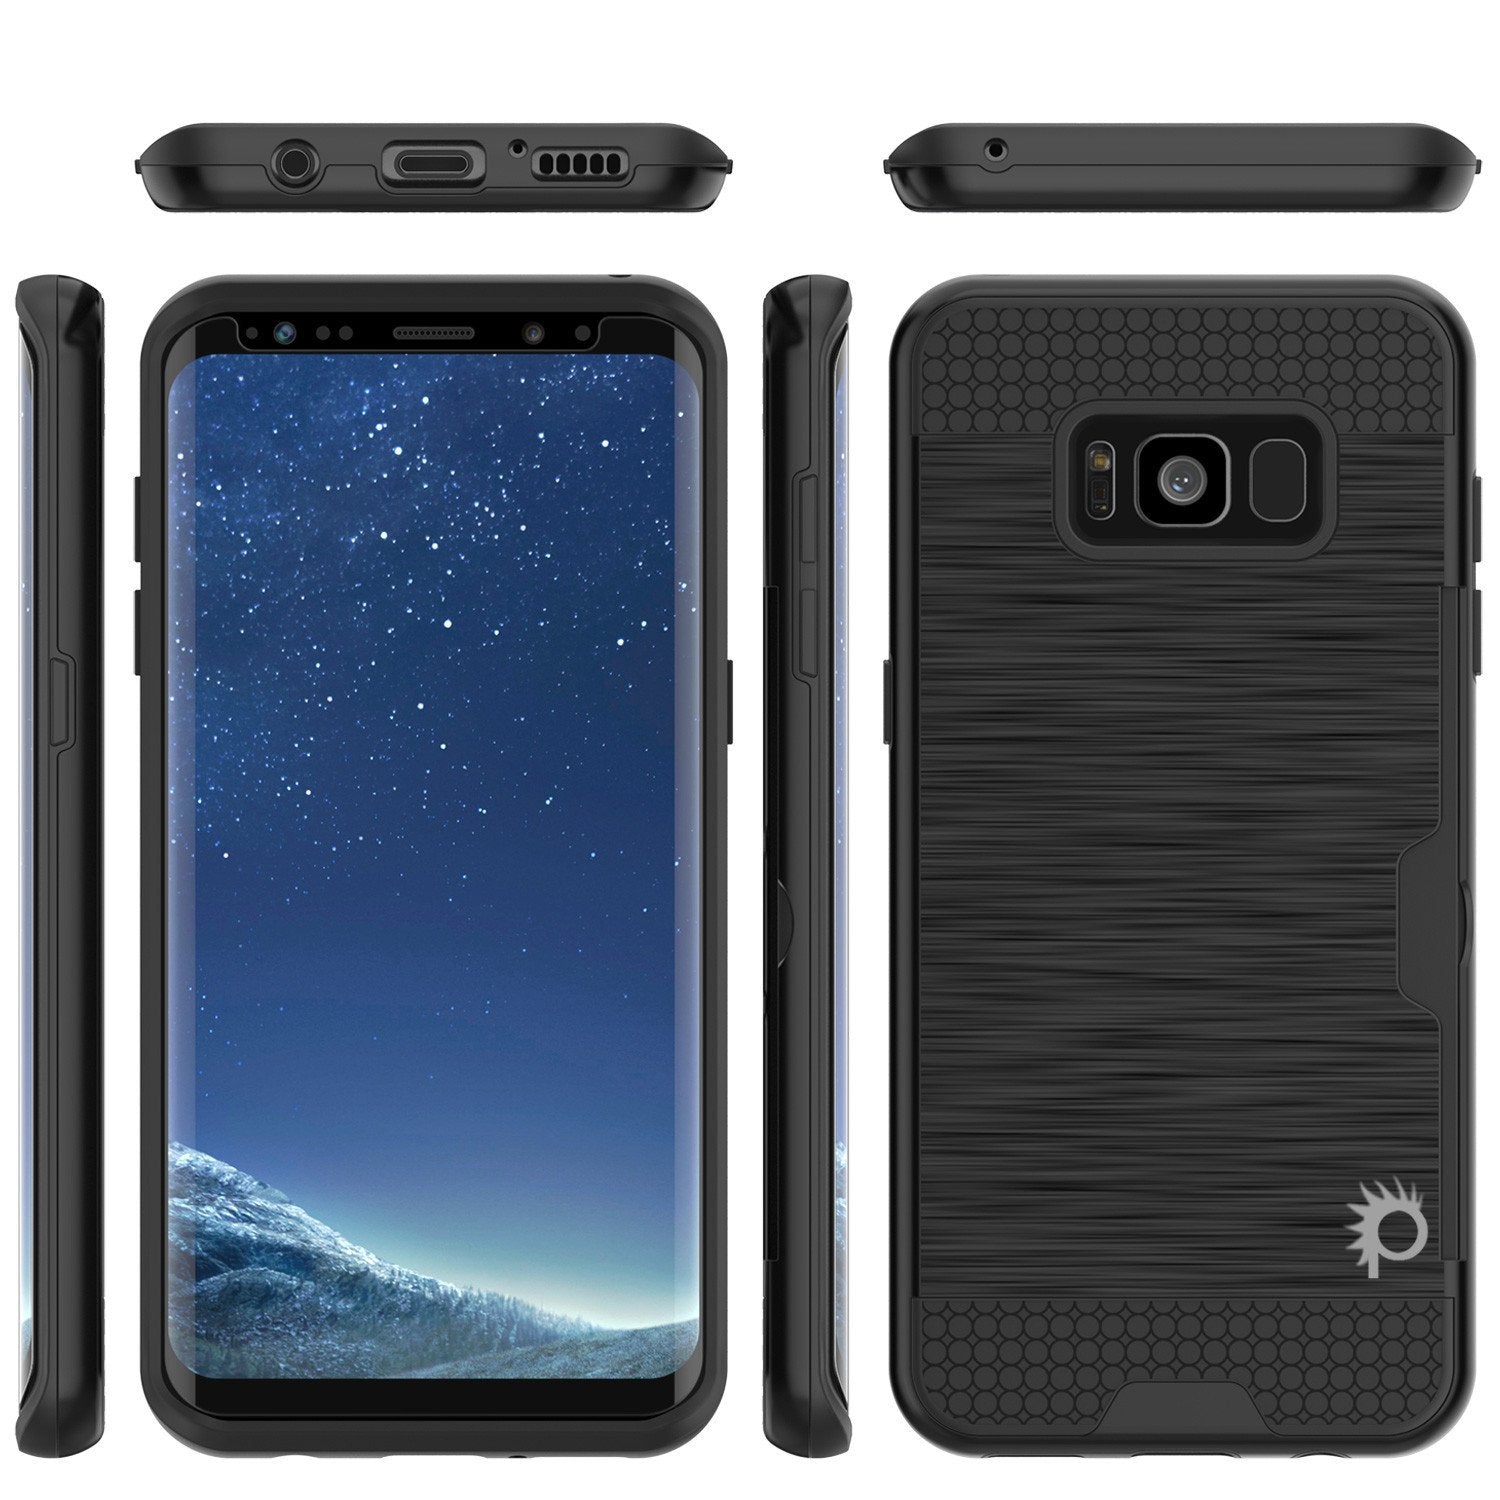 Galaxy S8 Plus Case, PUNKcase [SLOT Series] [Slim Fit] Dual-Layer Armor Cover w/Integrated Anti-Shock System, Credit Card Slot & PunkShield Screen Protector for Samsung Galaxy S8+ [Black] - PunkCase NZ